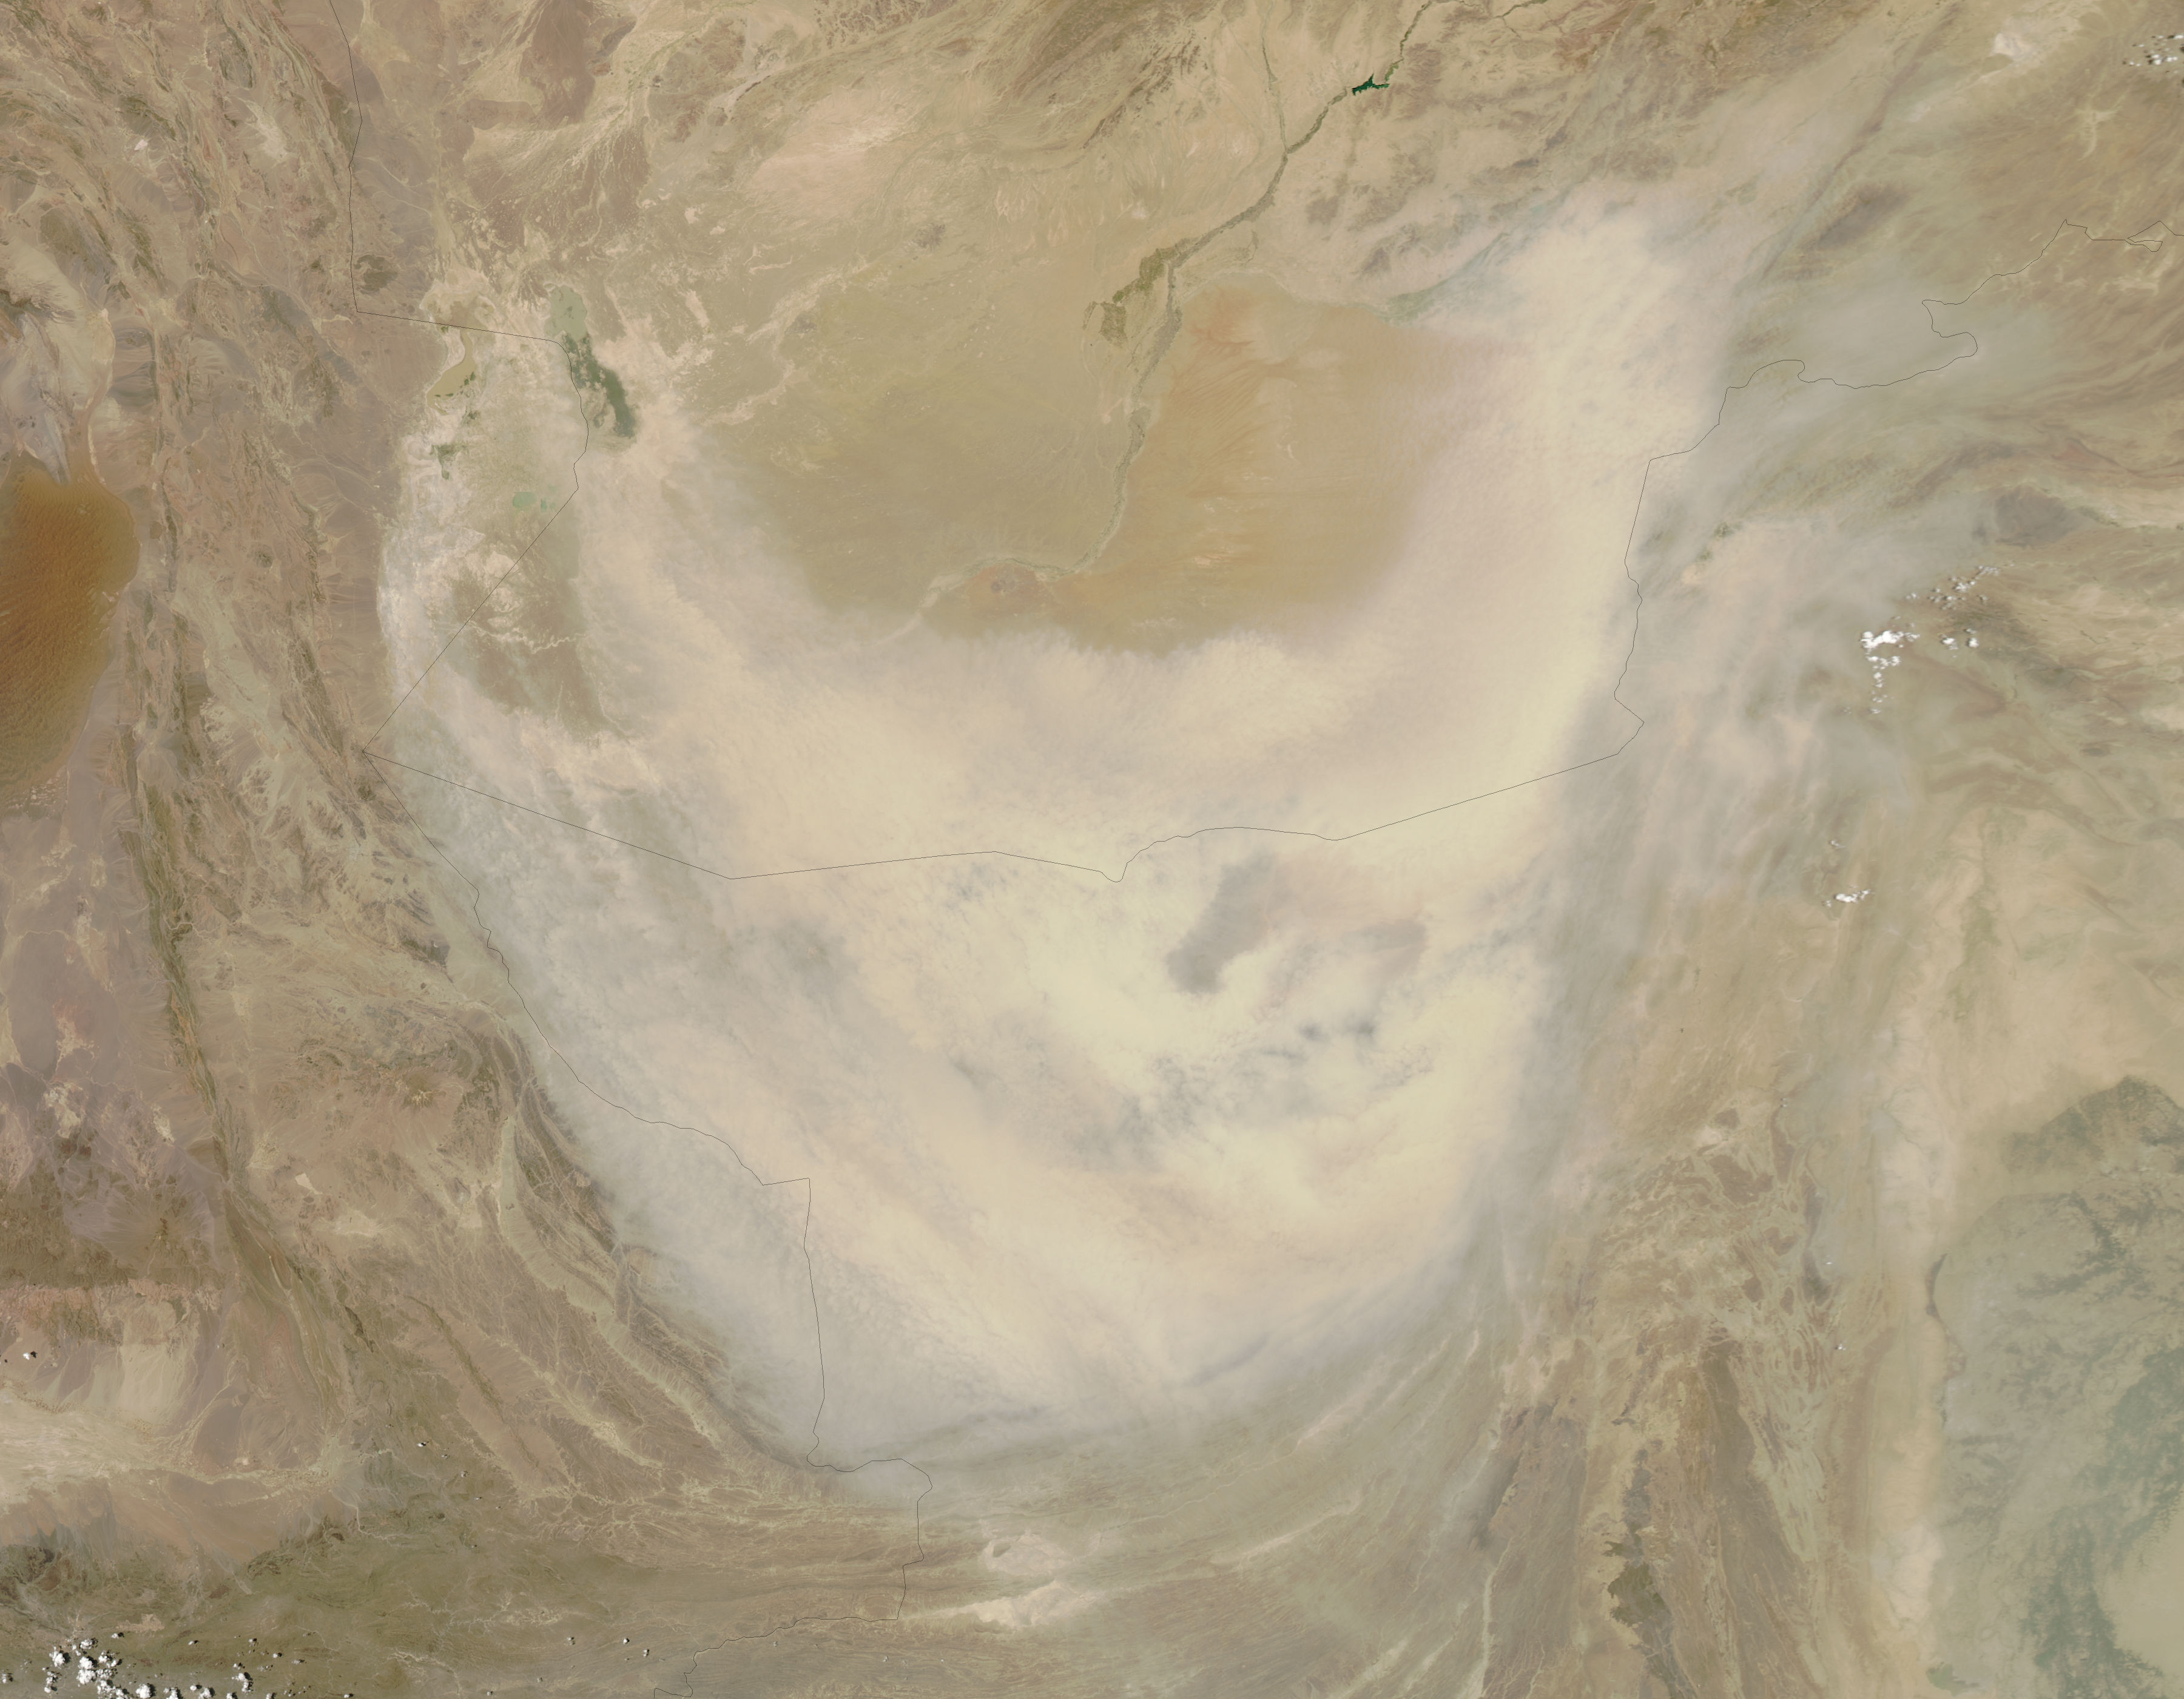 Dust Storm over Southern Afghanistan - related image preview